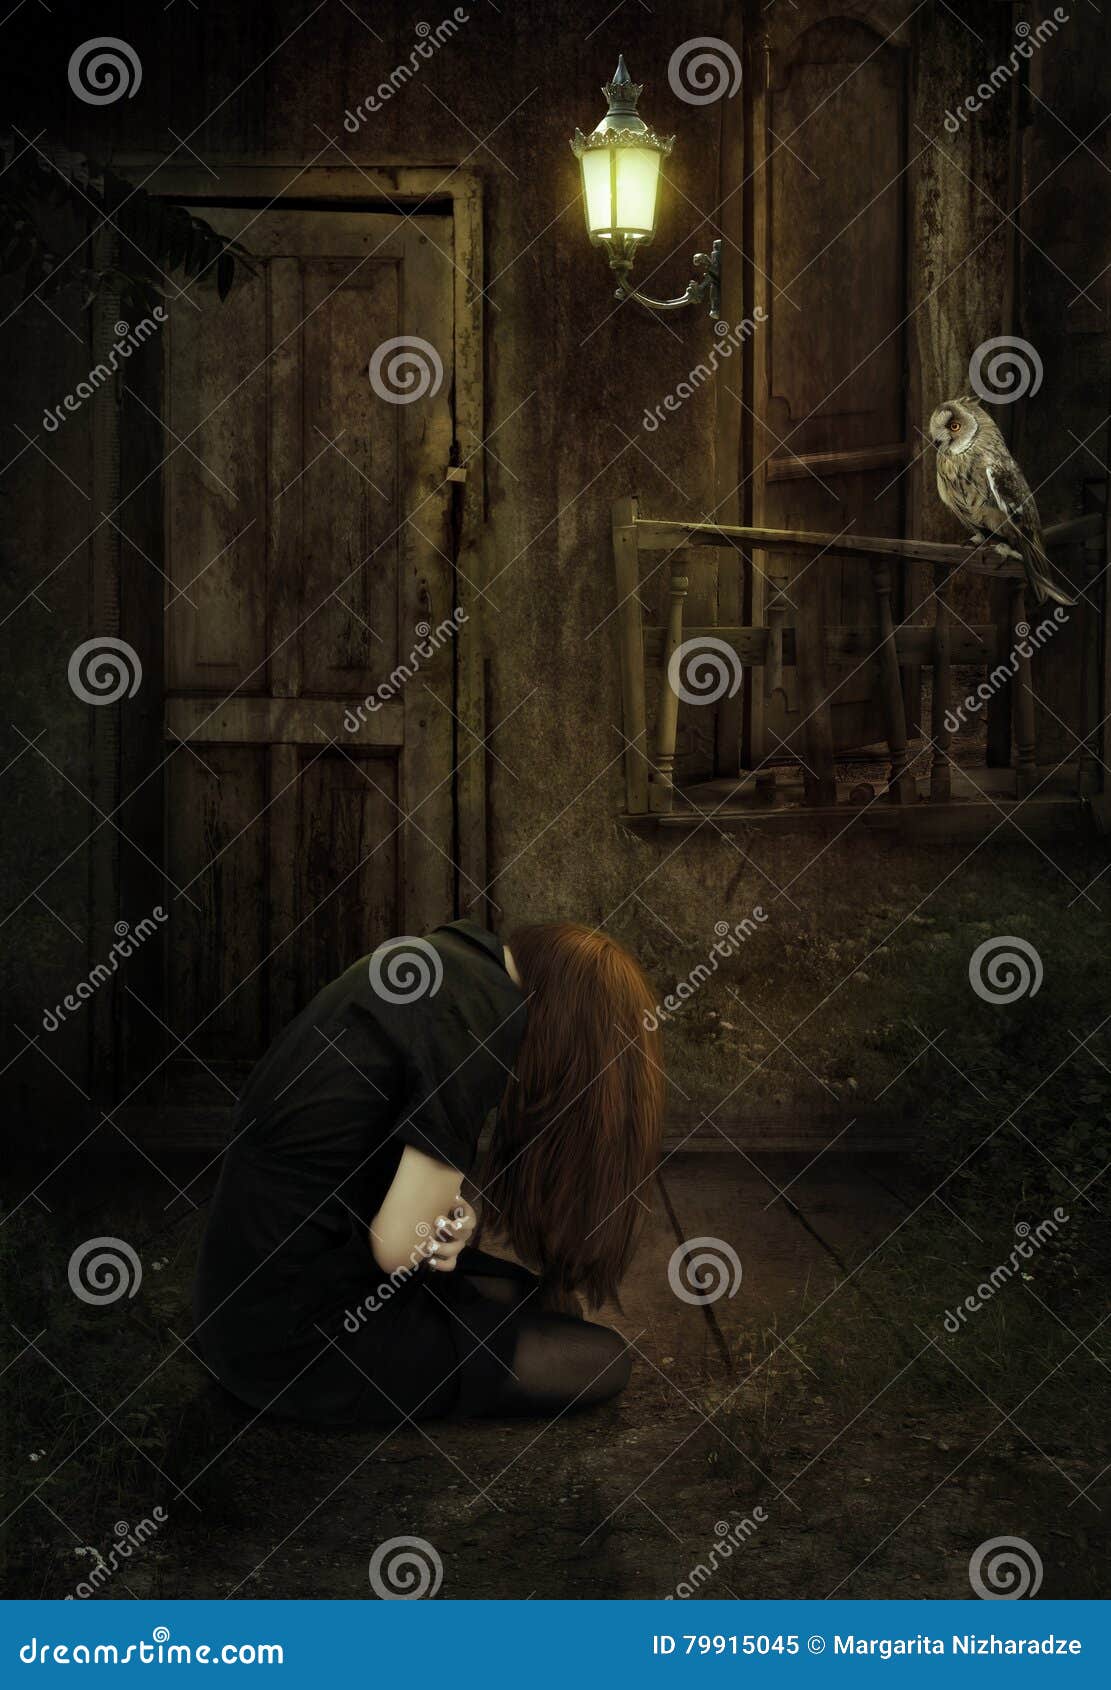 The Girl in an Abandoned House Stock Image - Image of posture, darkness ...